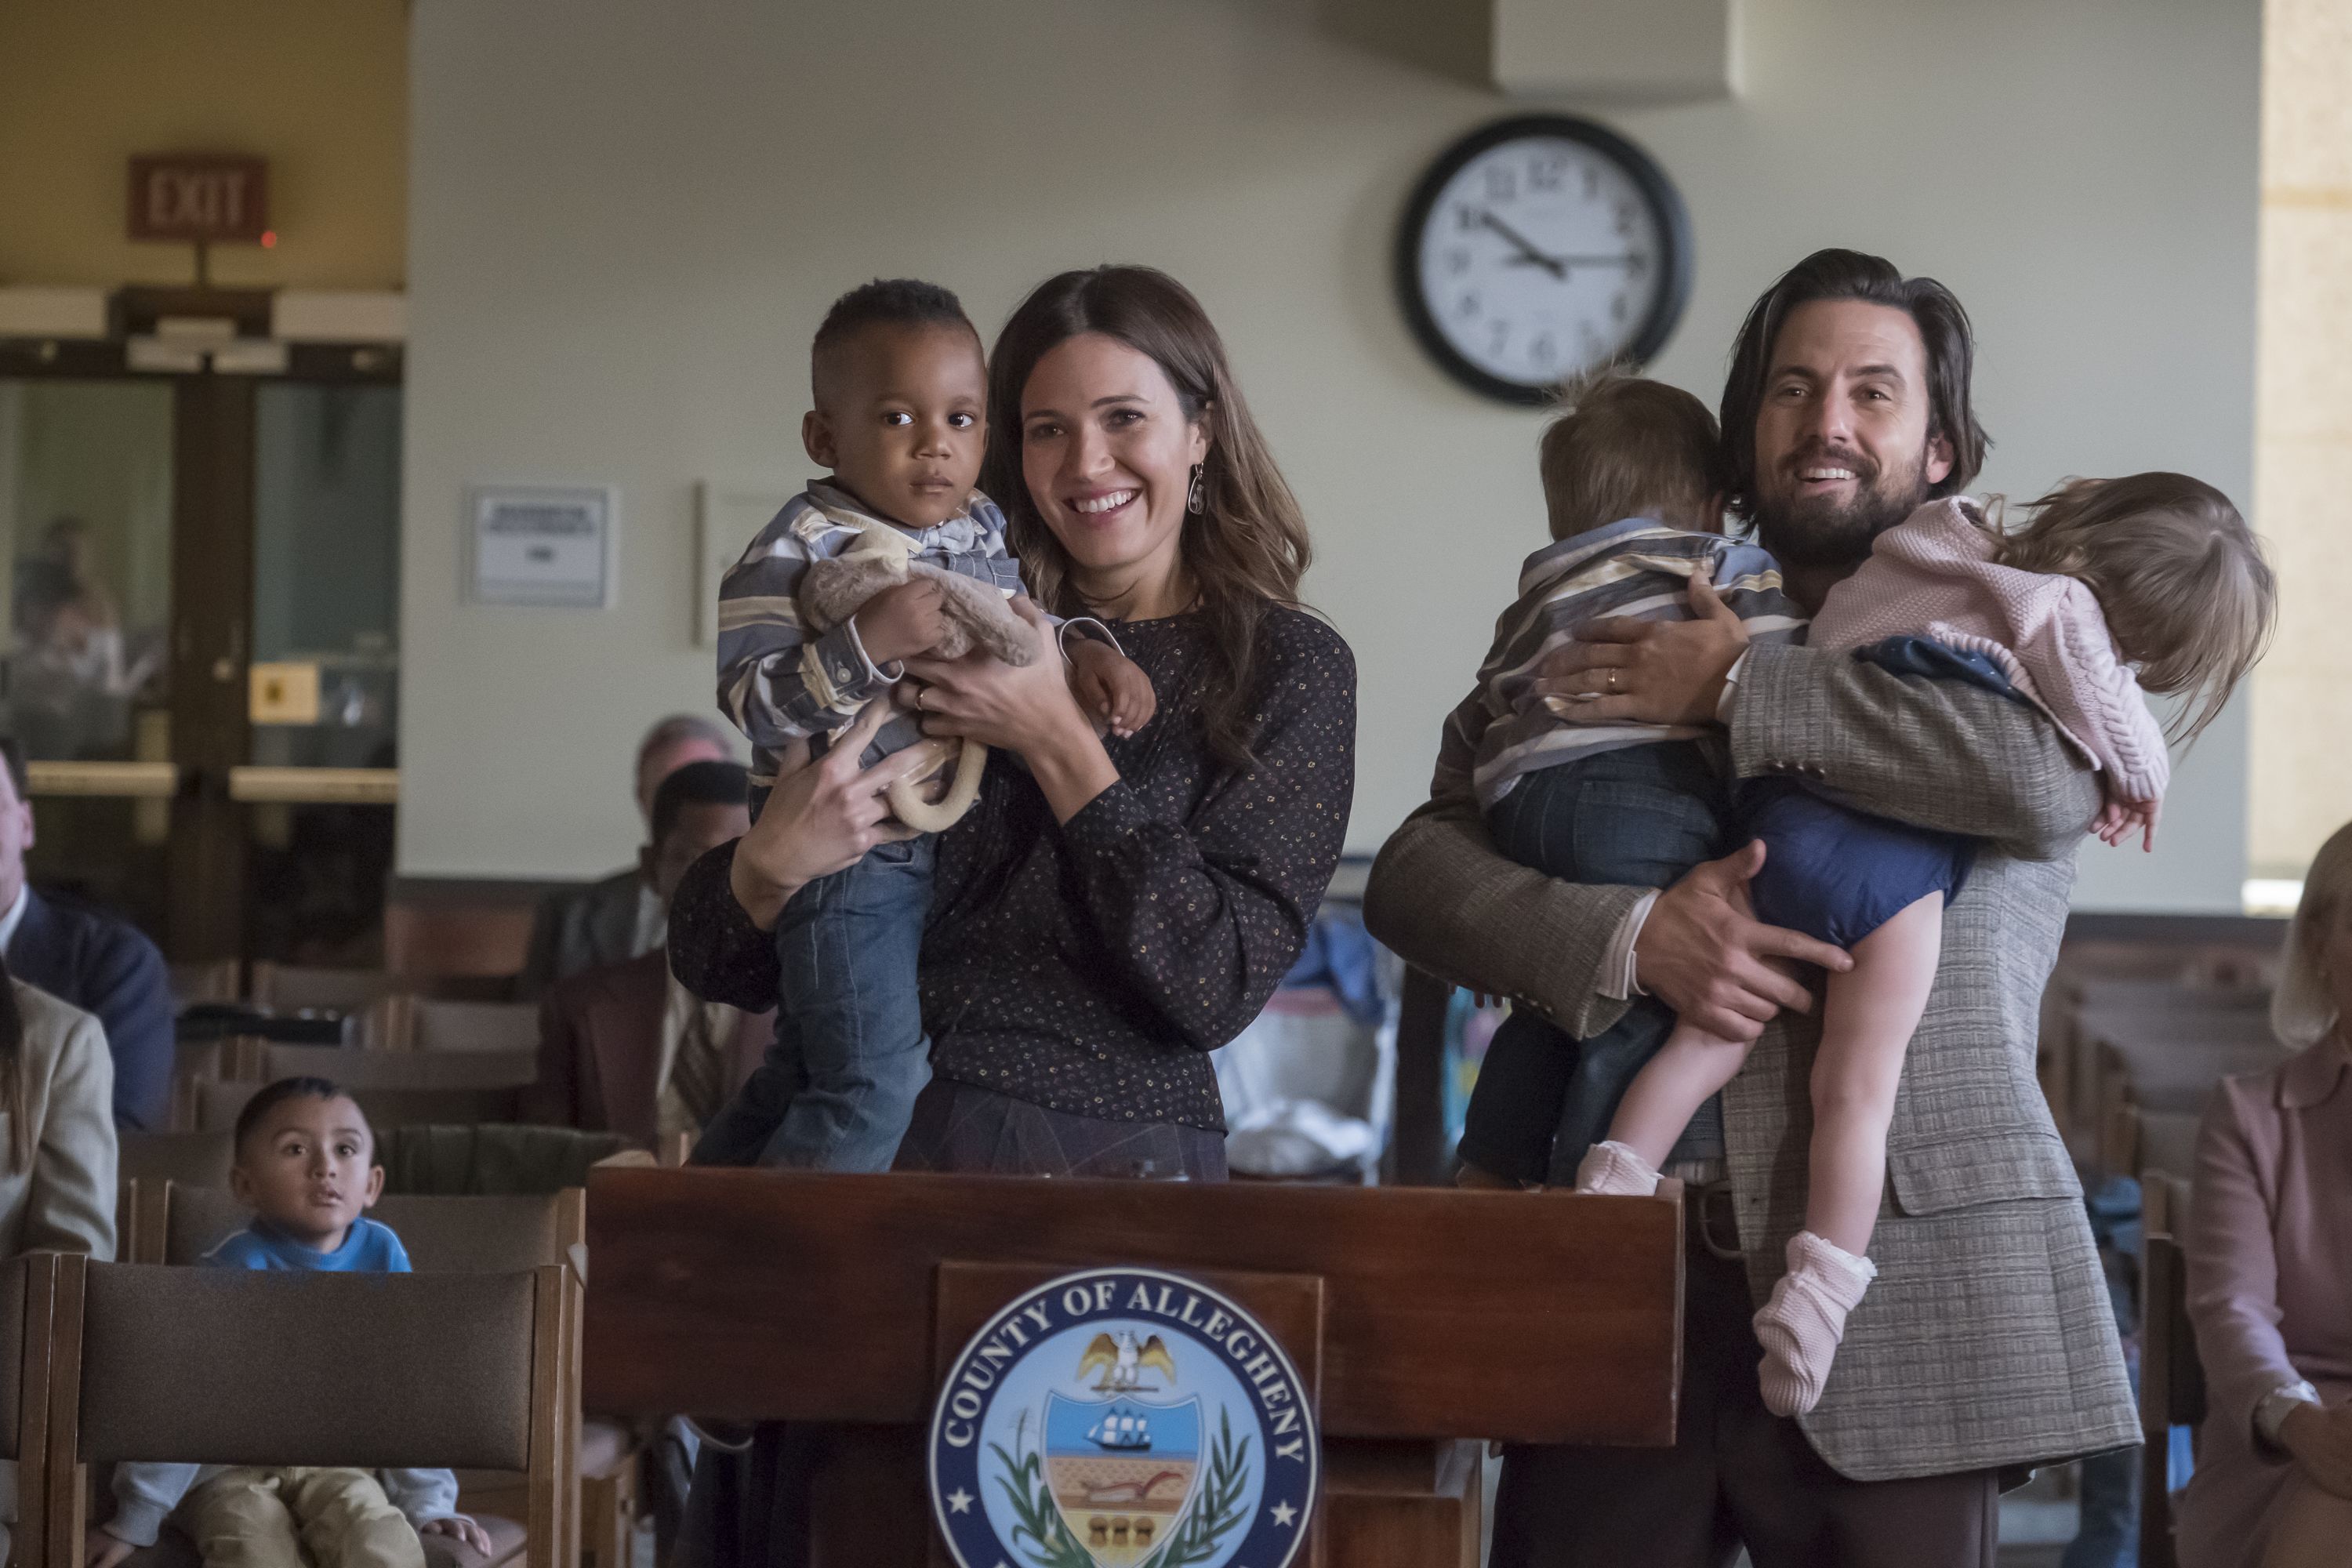 This is Us: All the questions you were afraid to ask about the show